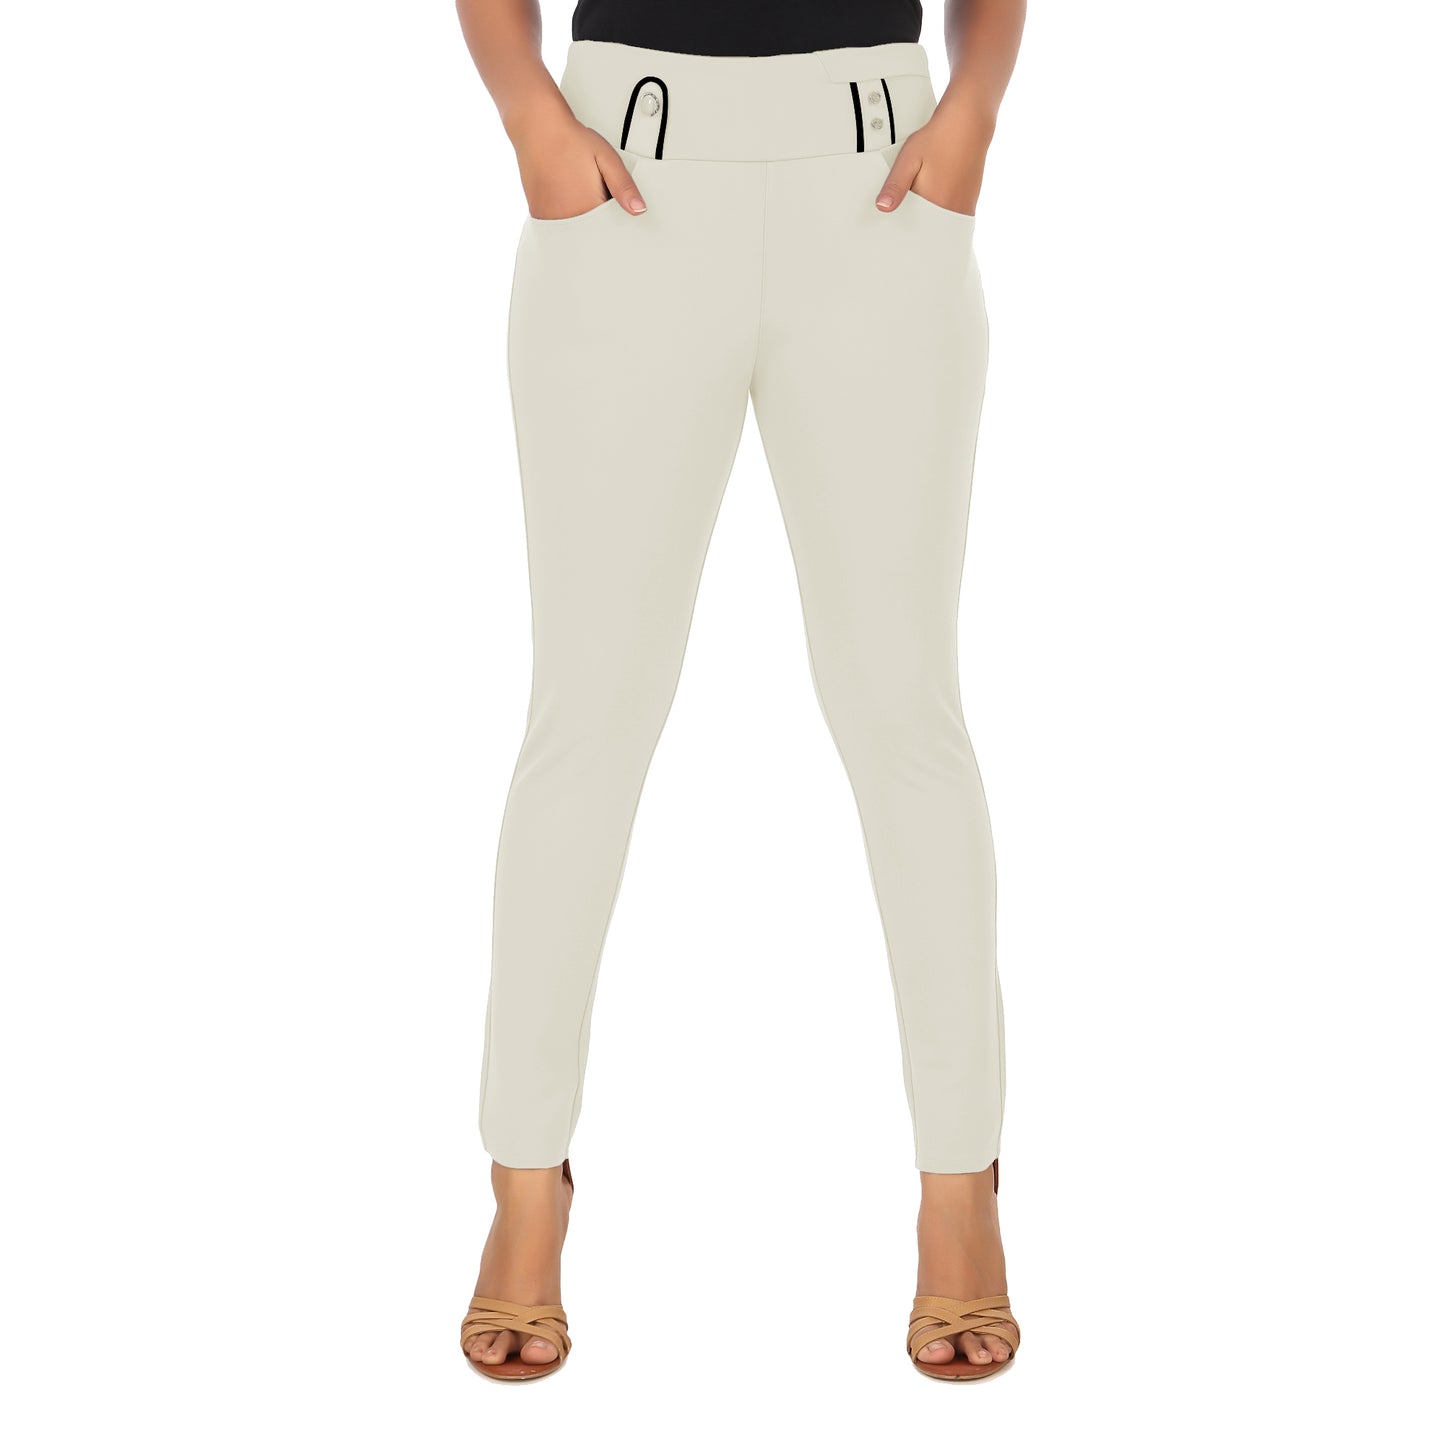 ComfortFit Women's Mid-Waist Jeggings with 2 Front Pockets - Off White